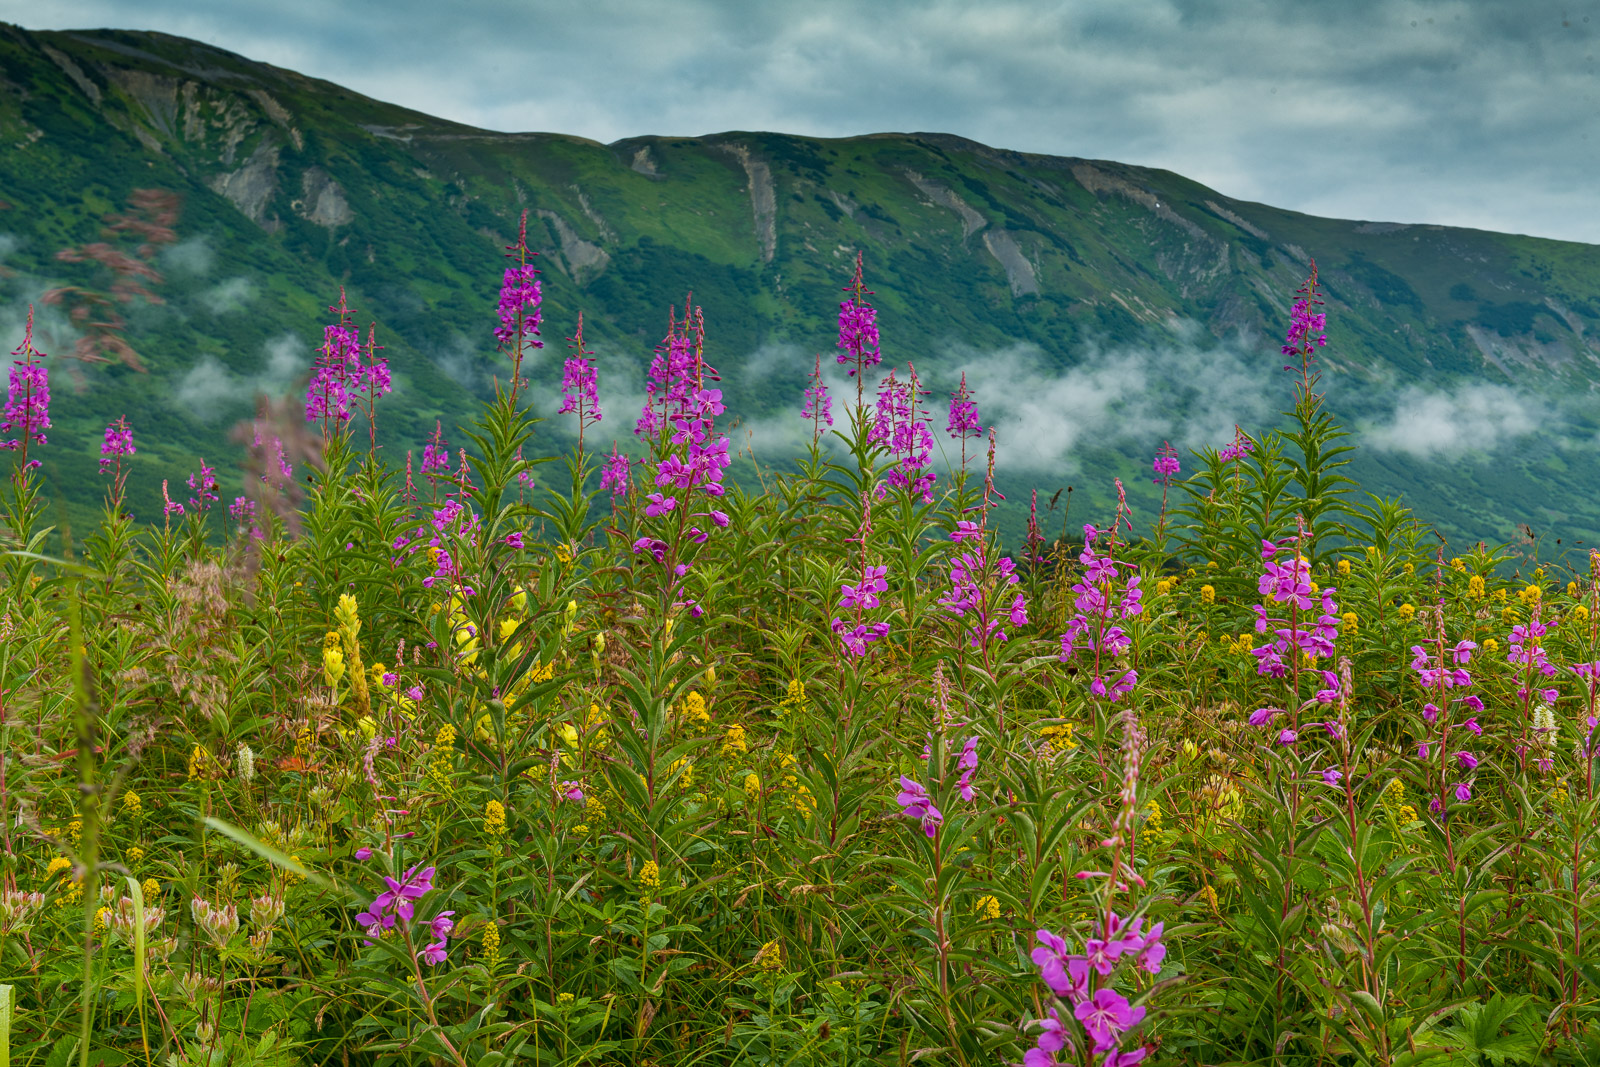 A cluster of fireweed adds color to the greens of Turnagain Pass, Chugach National Forest.